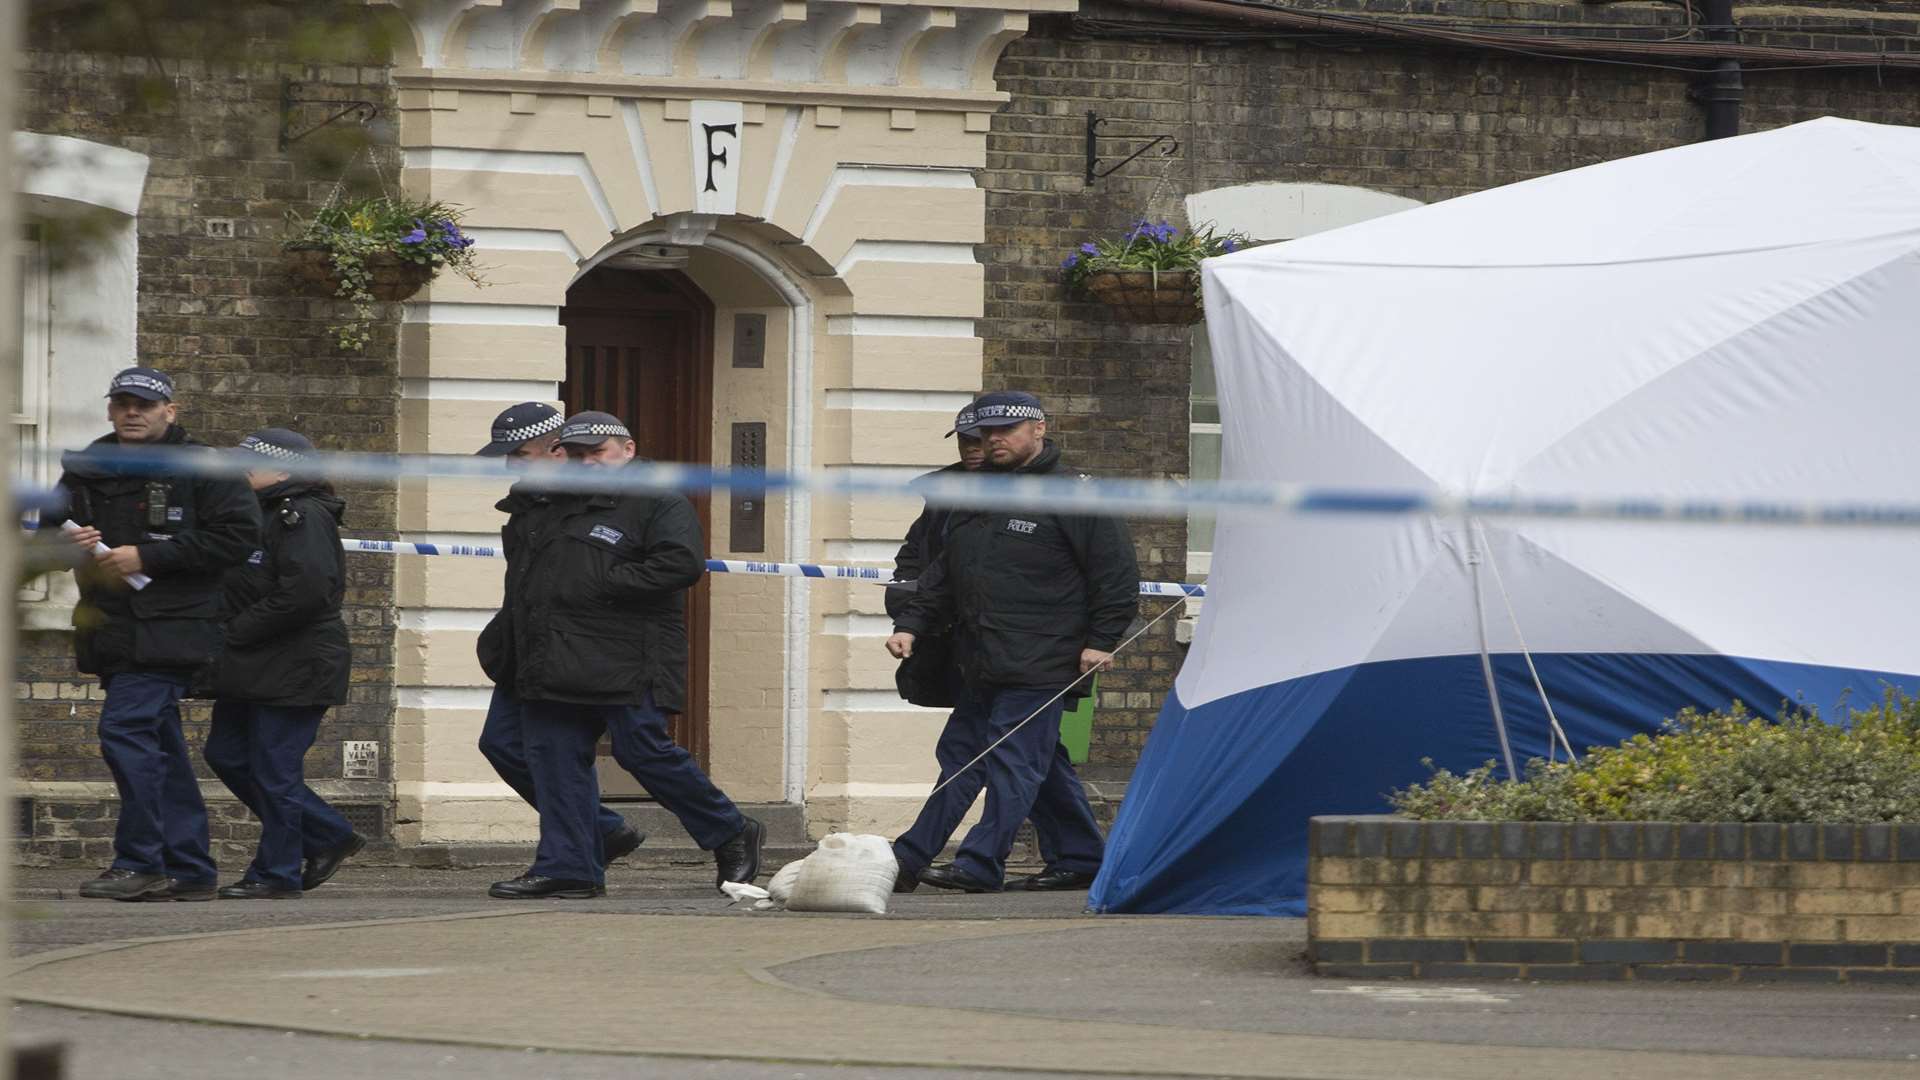 A forensics tent in the street. Picture: SWNS